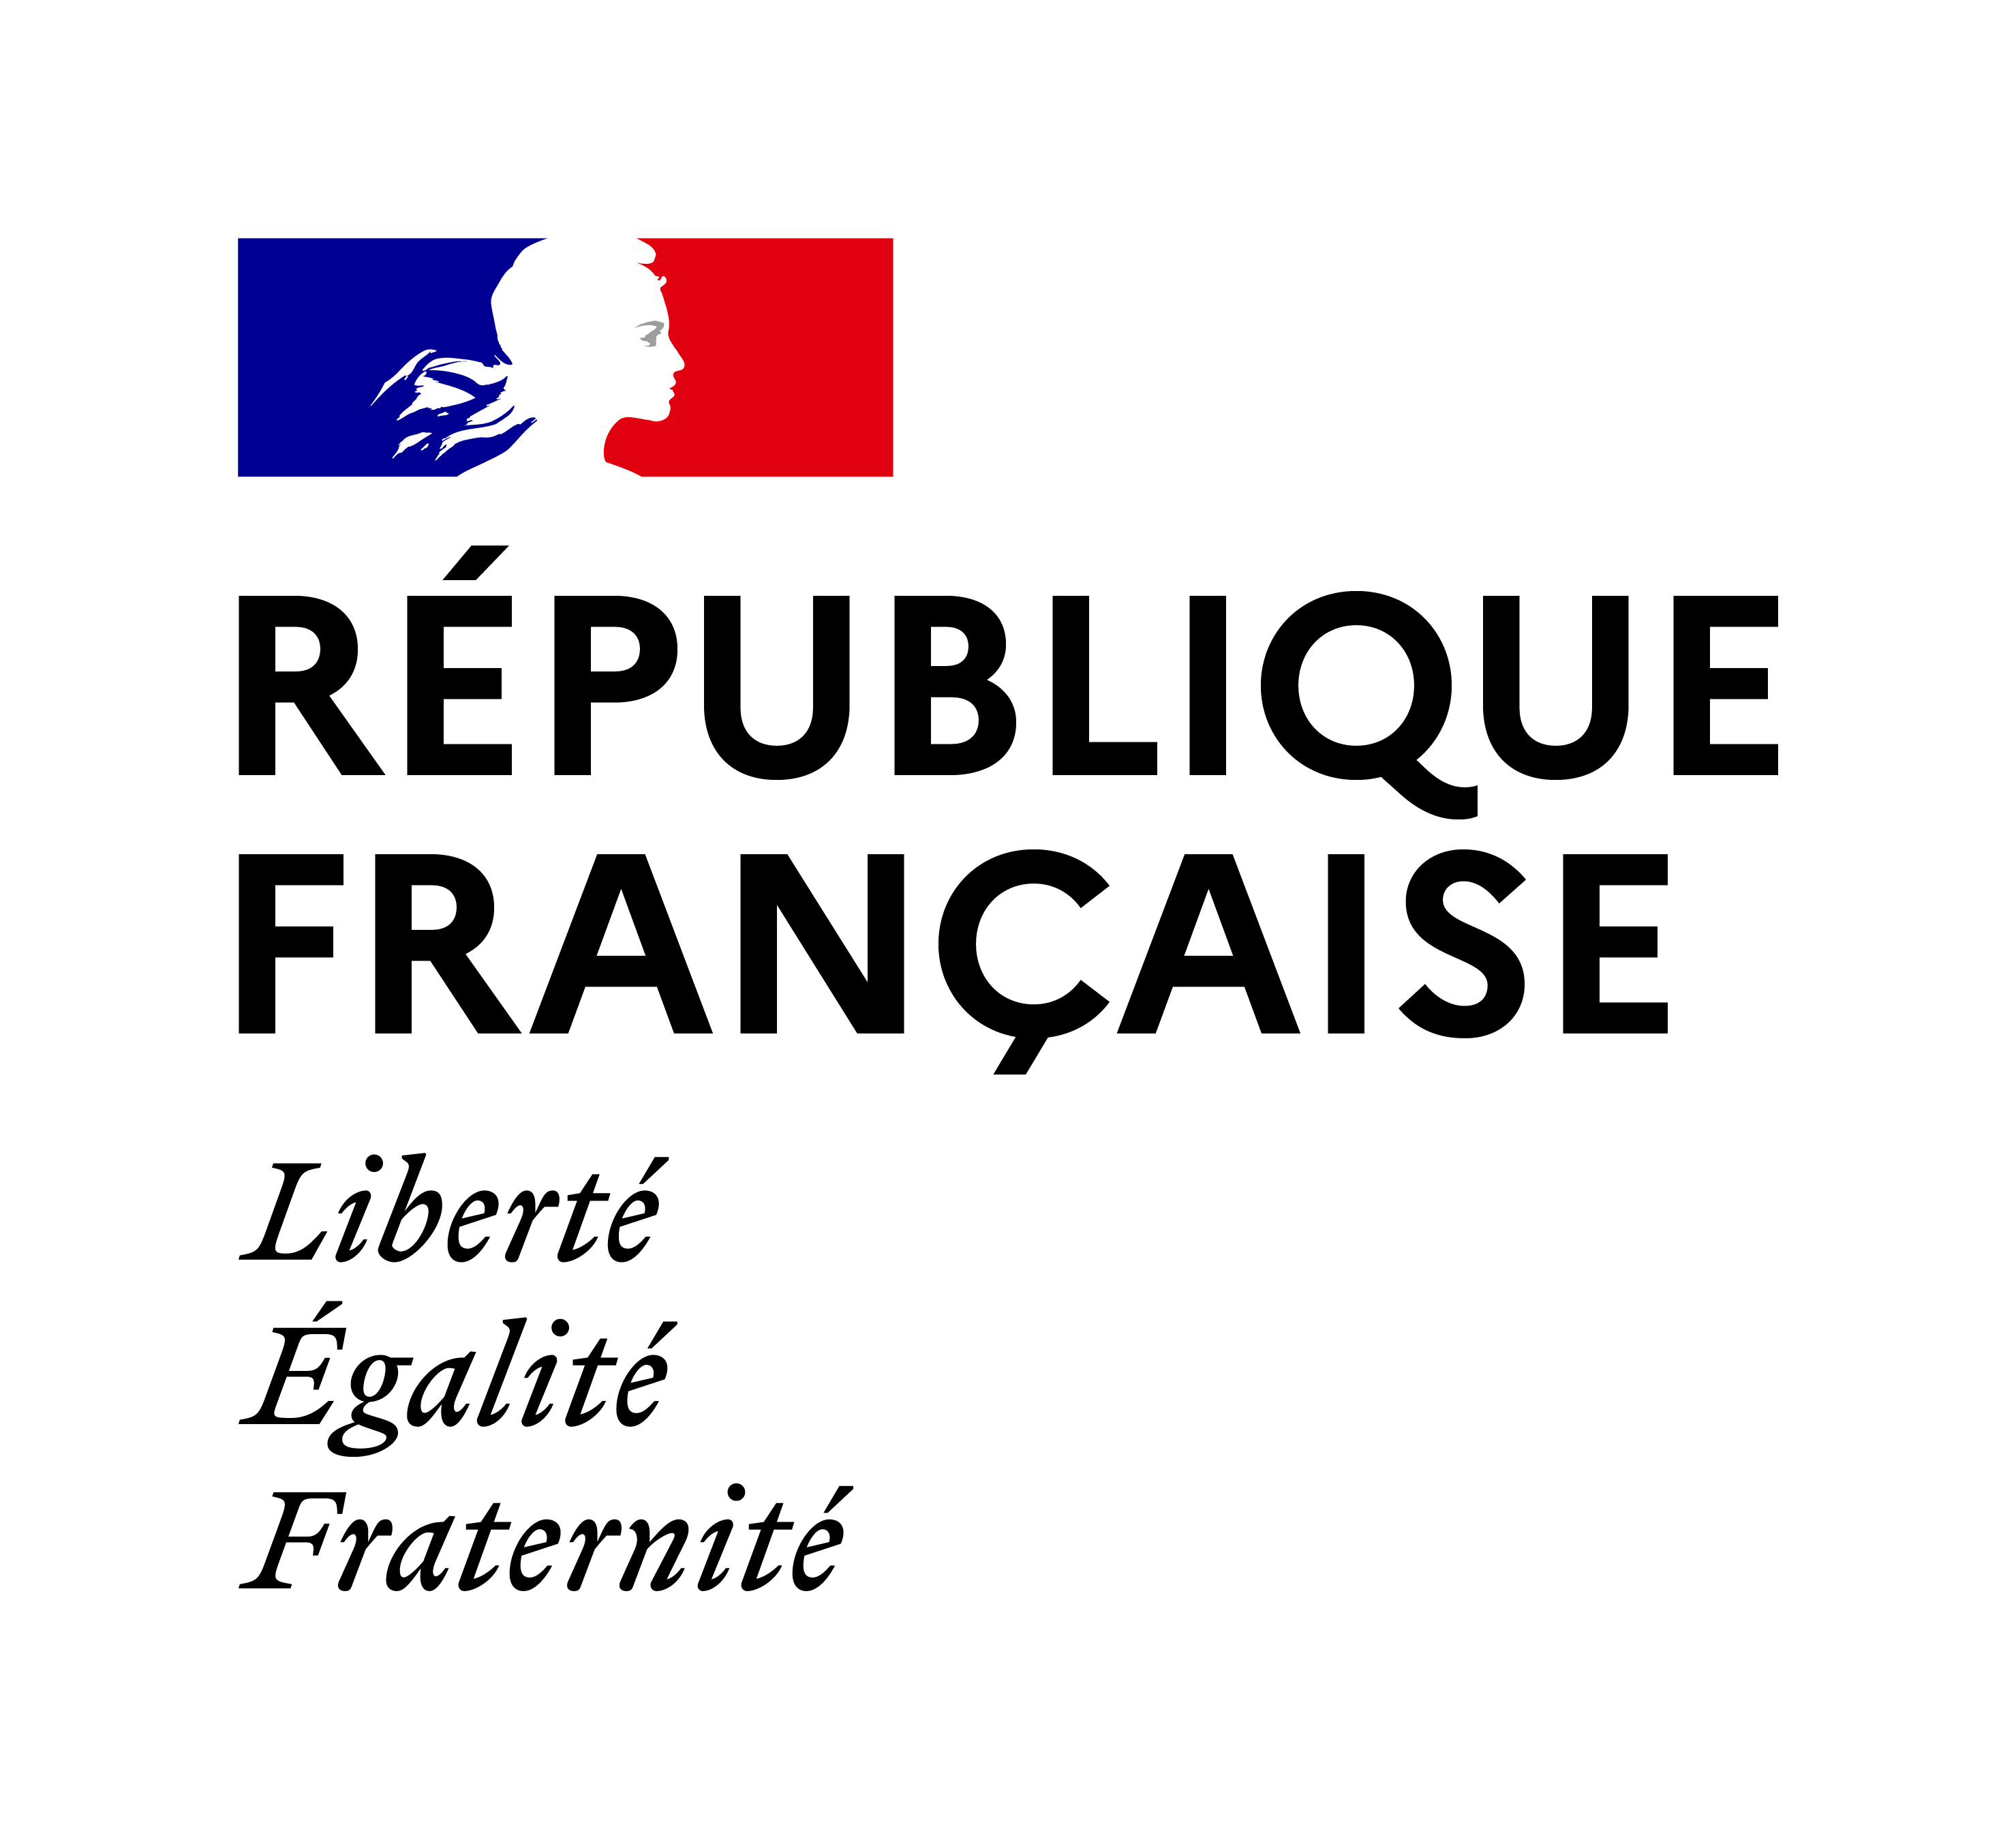 French Ministry for Europe and Foreign Affairs